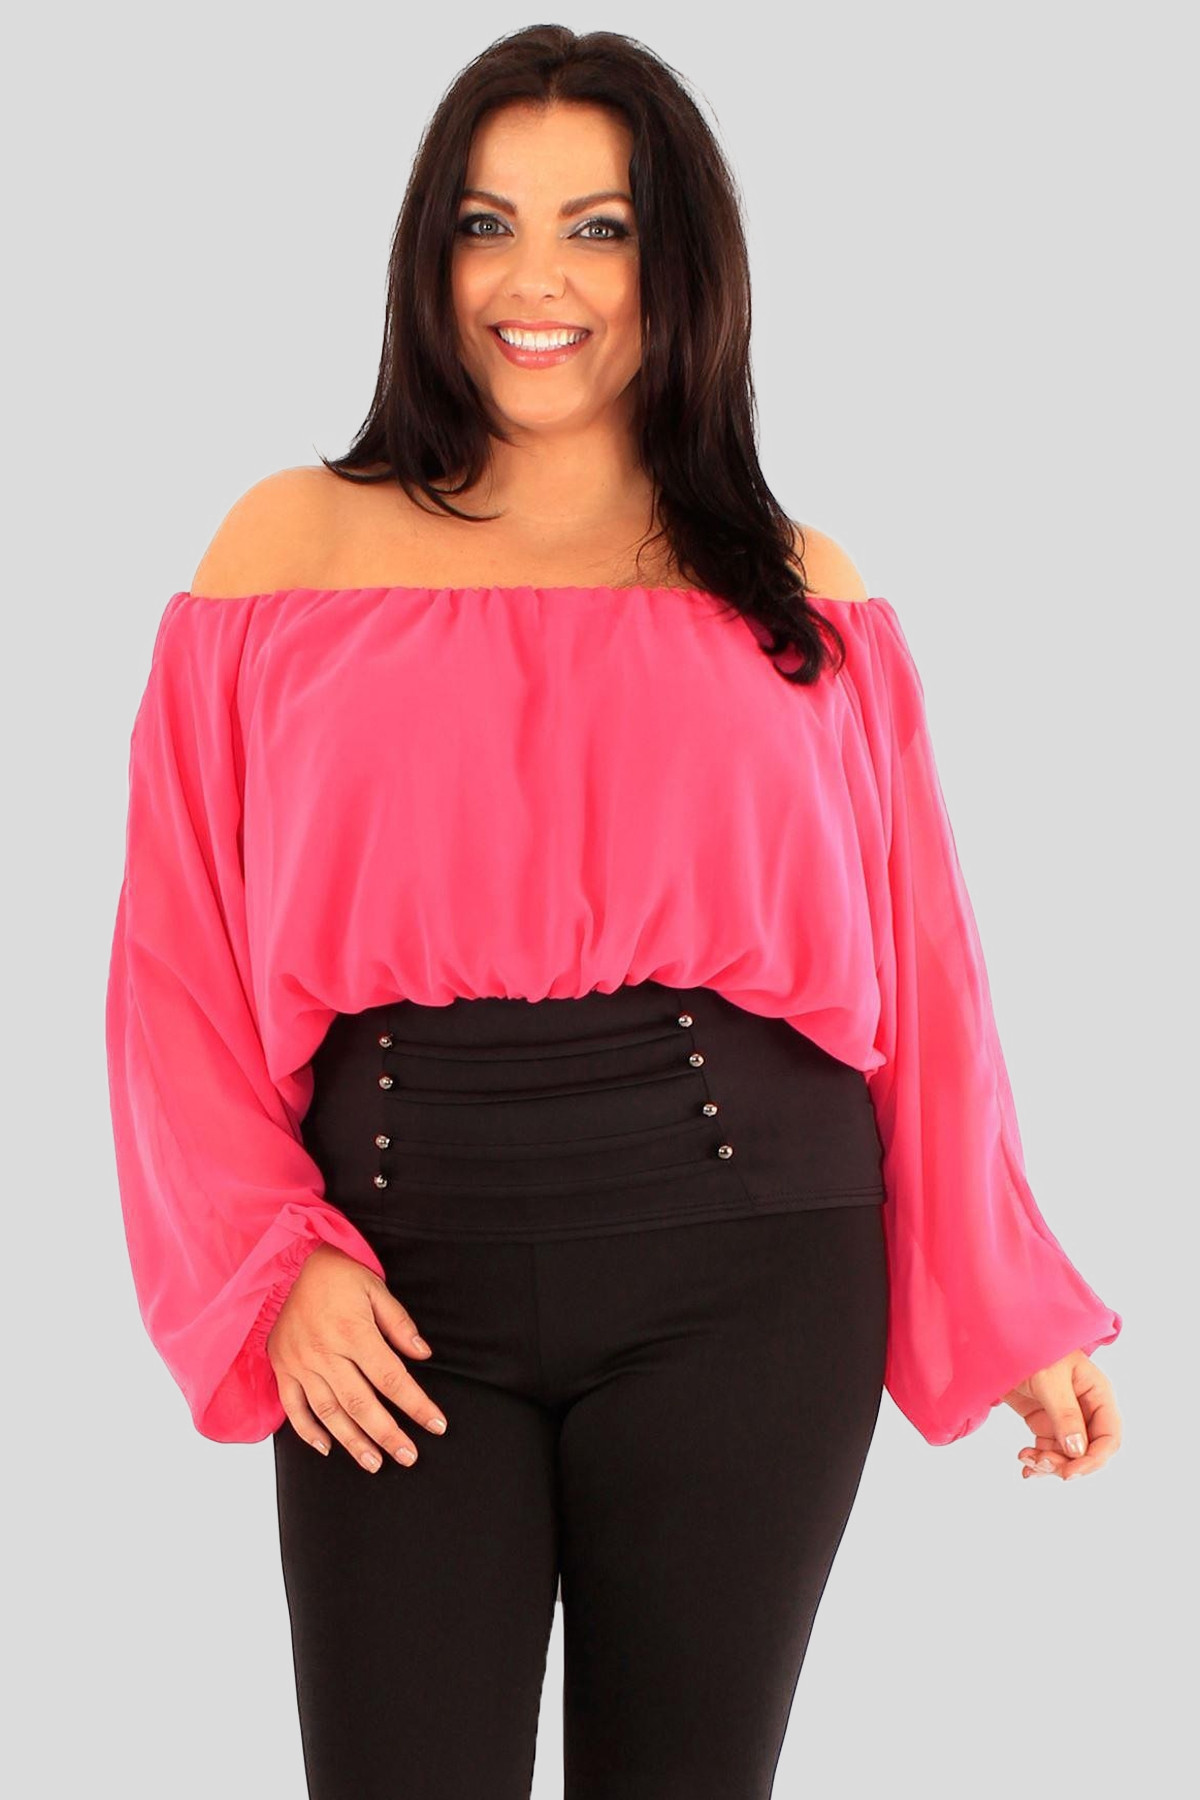 New Womes Off Shoulder Elasticated Plain Boho Ladies Stretch Fit Long Plus Size Gypsy Top 